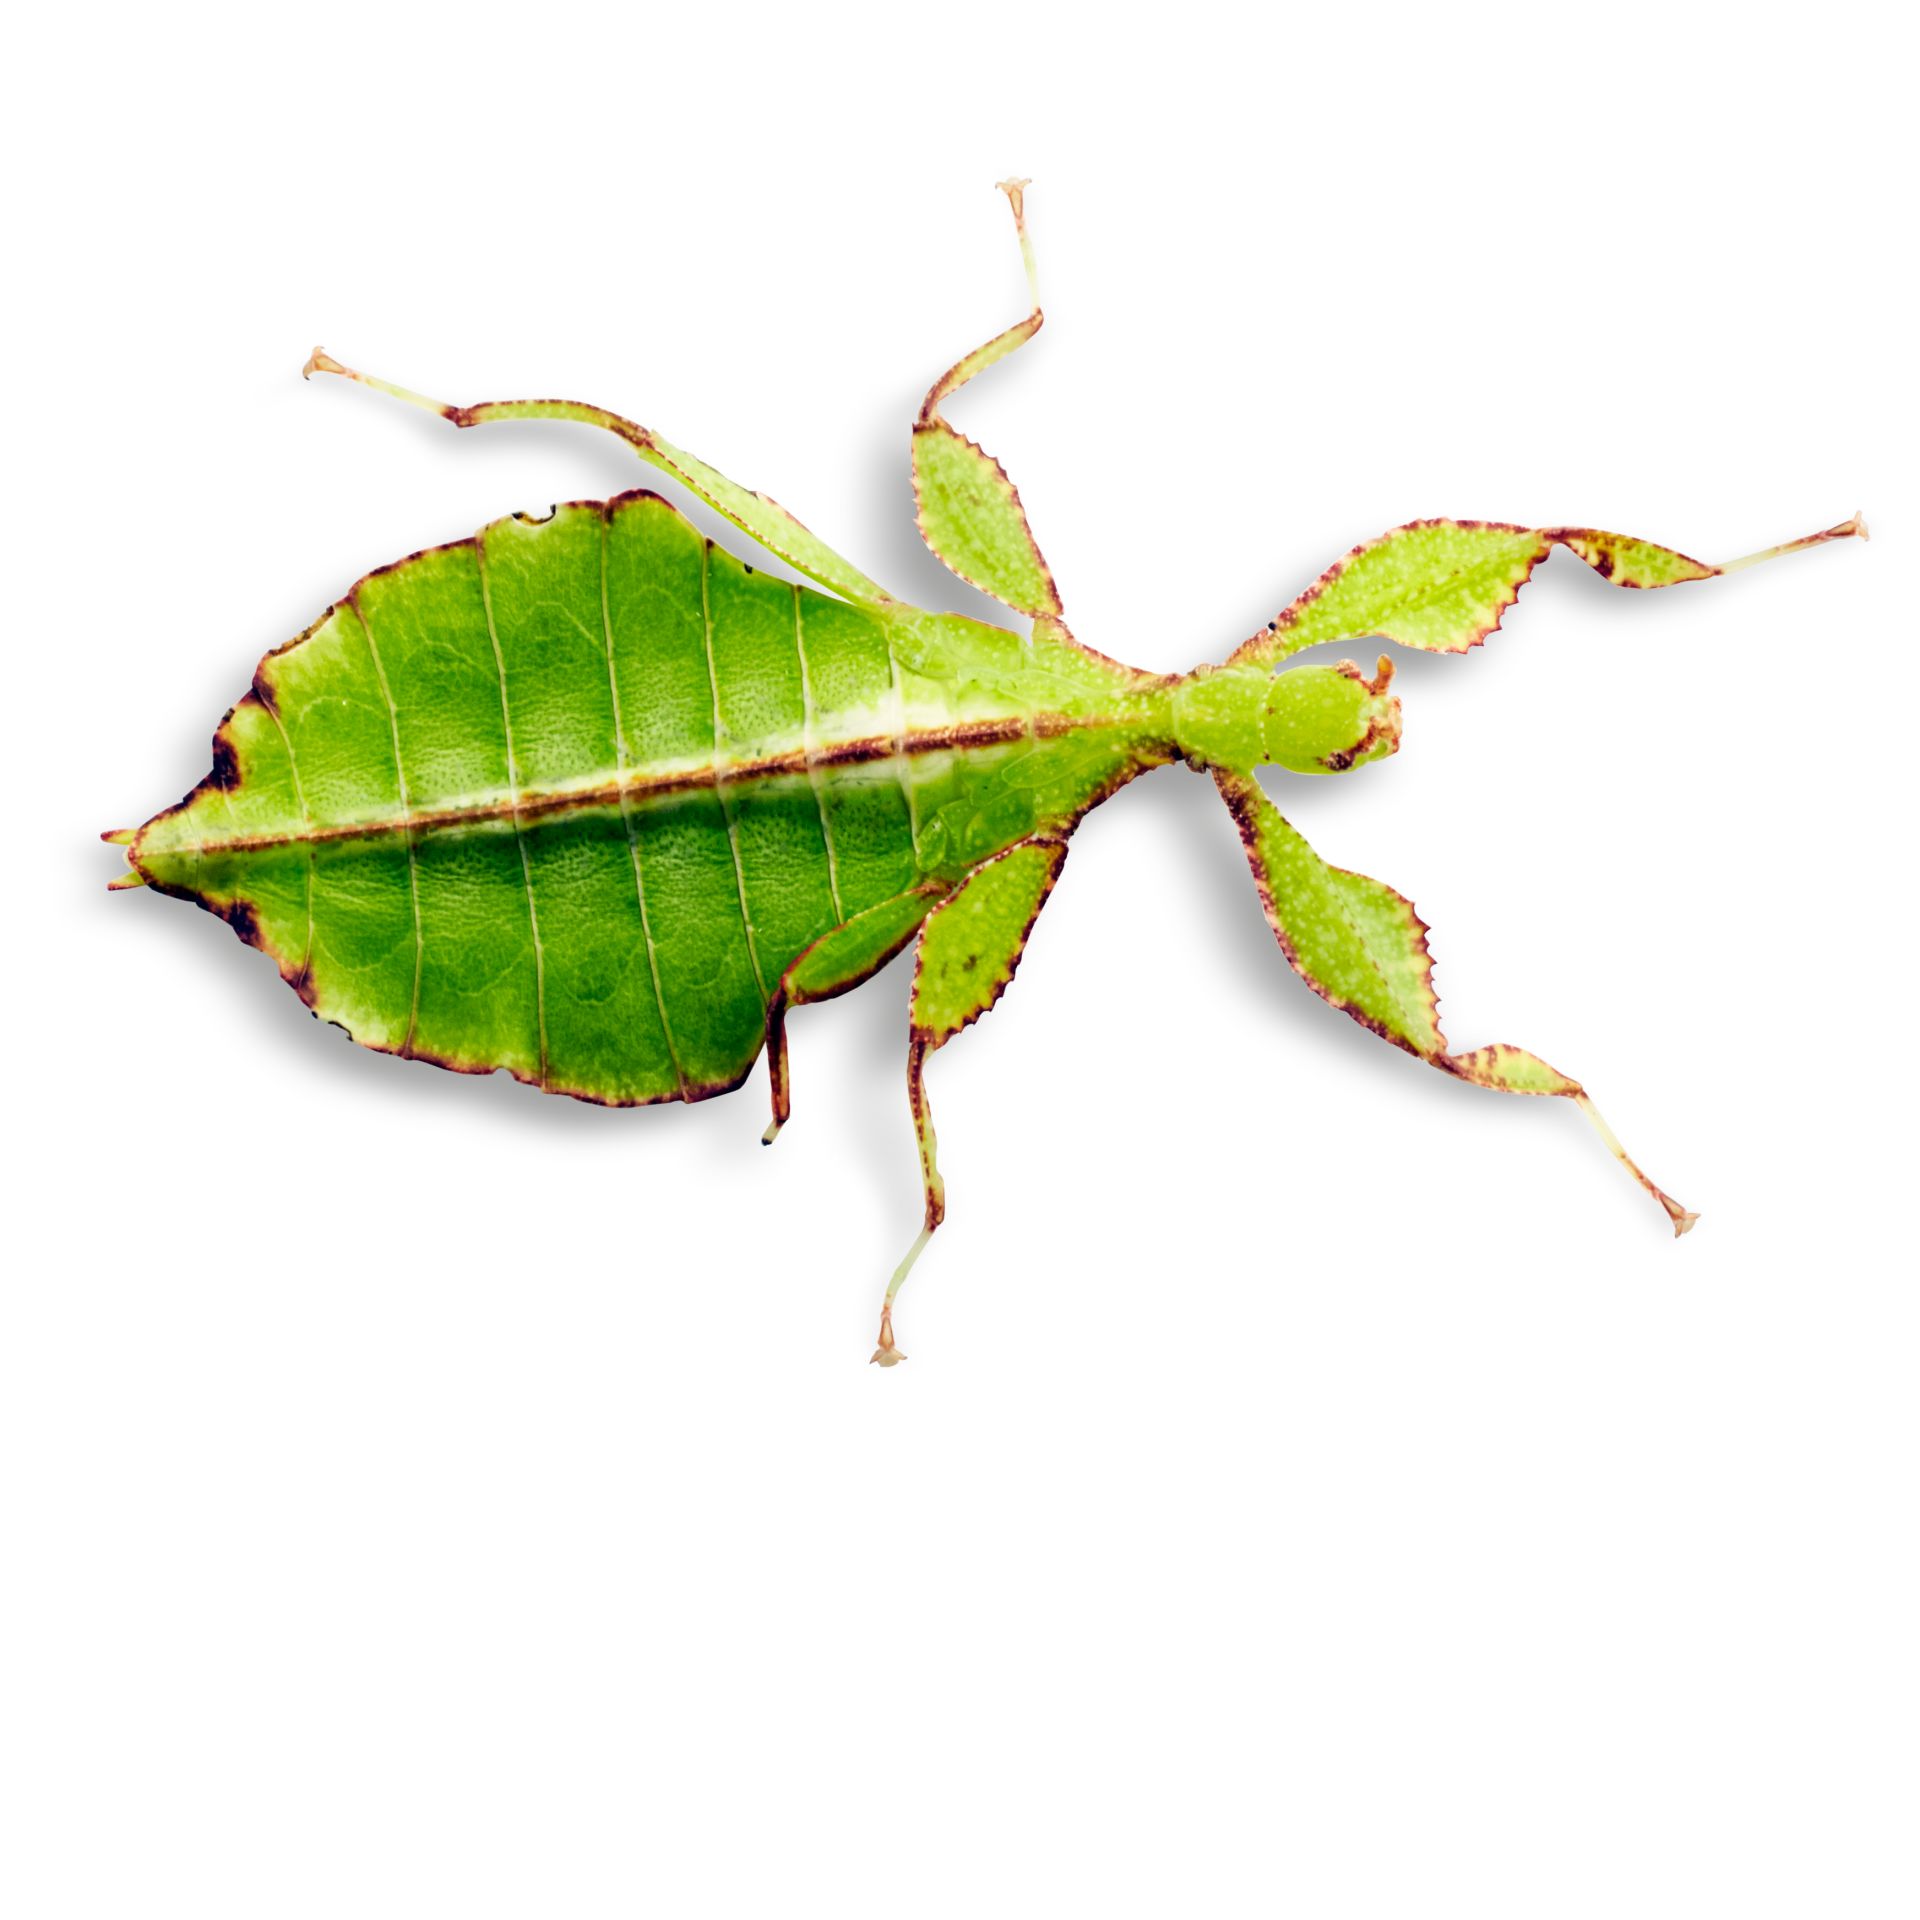 Leaf Insect Facts | What Are Leaf Insects | DK Find Out